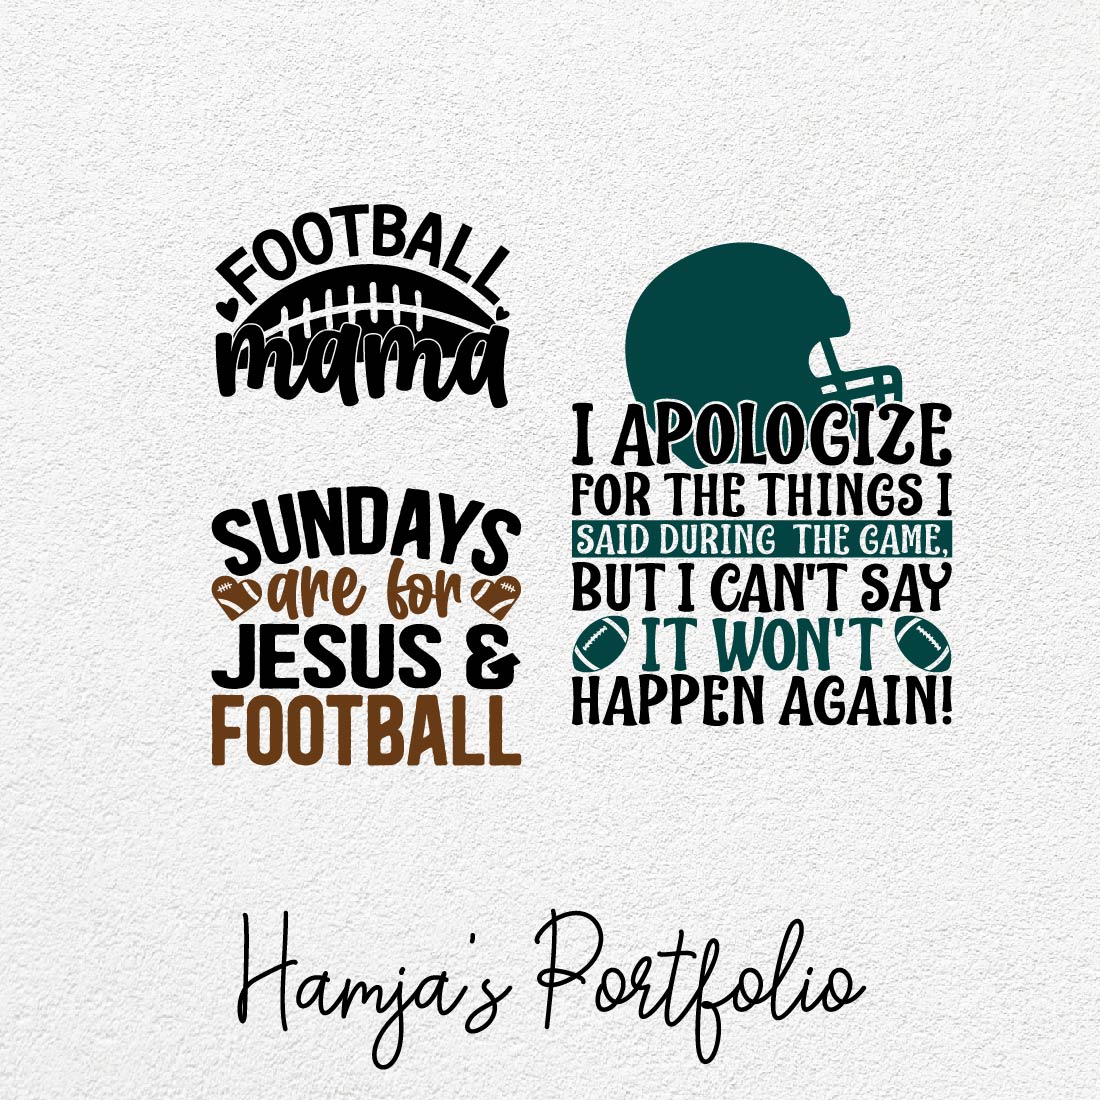 Football Vector Bundle cover image.